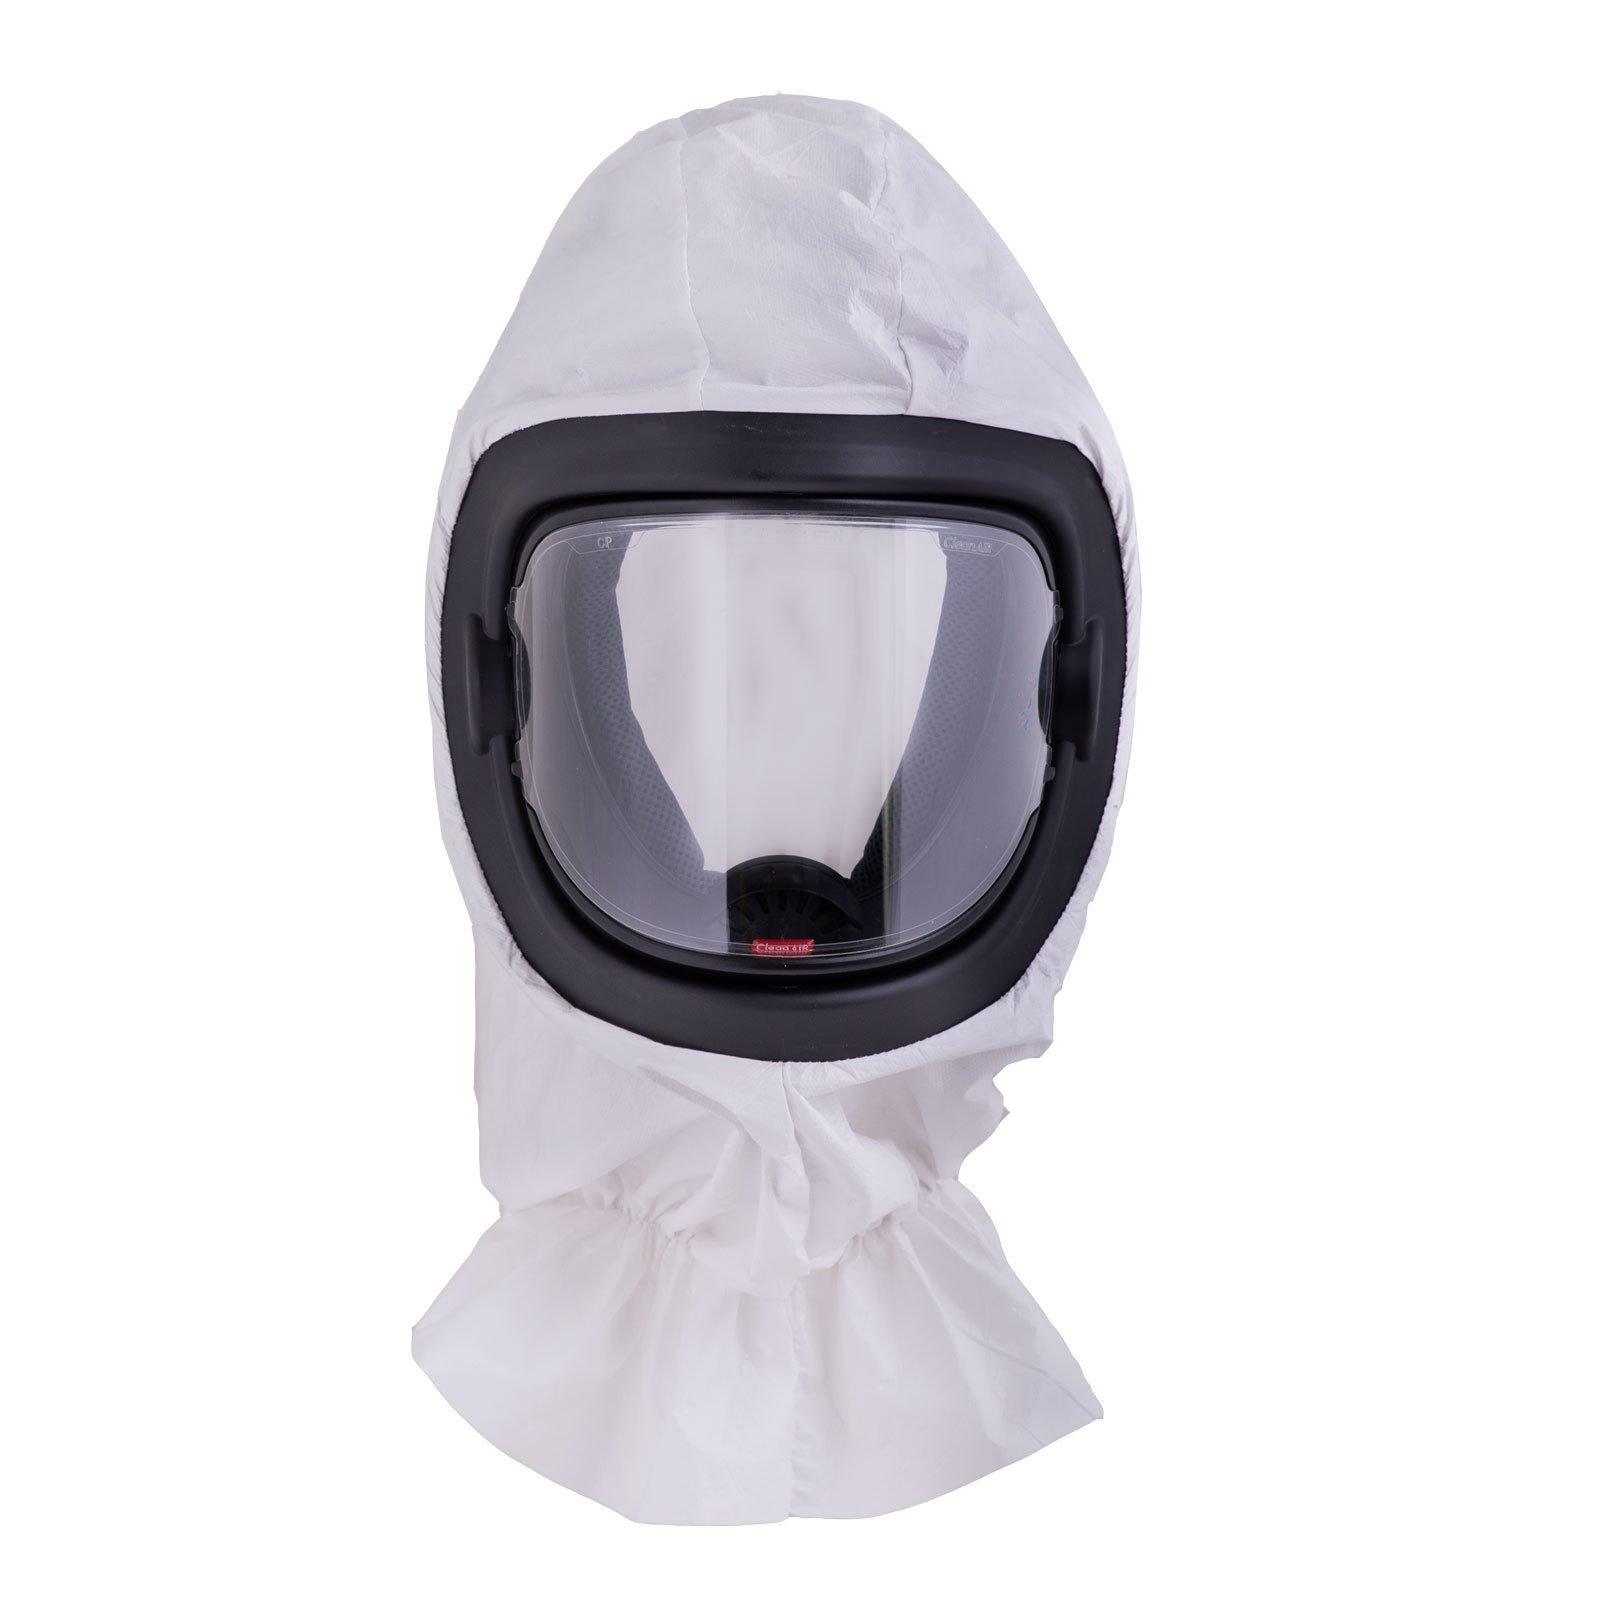 PROTECTIVE SHORT HOOD -COMPATIBLE W/ CLEANAIR UNIMASK